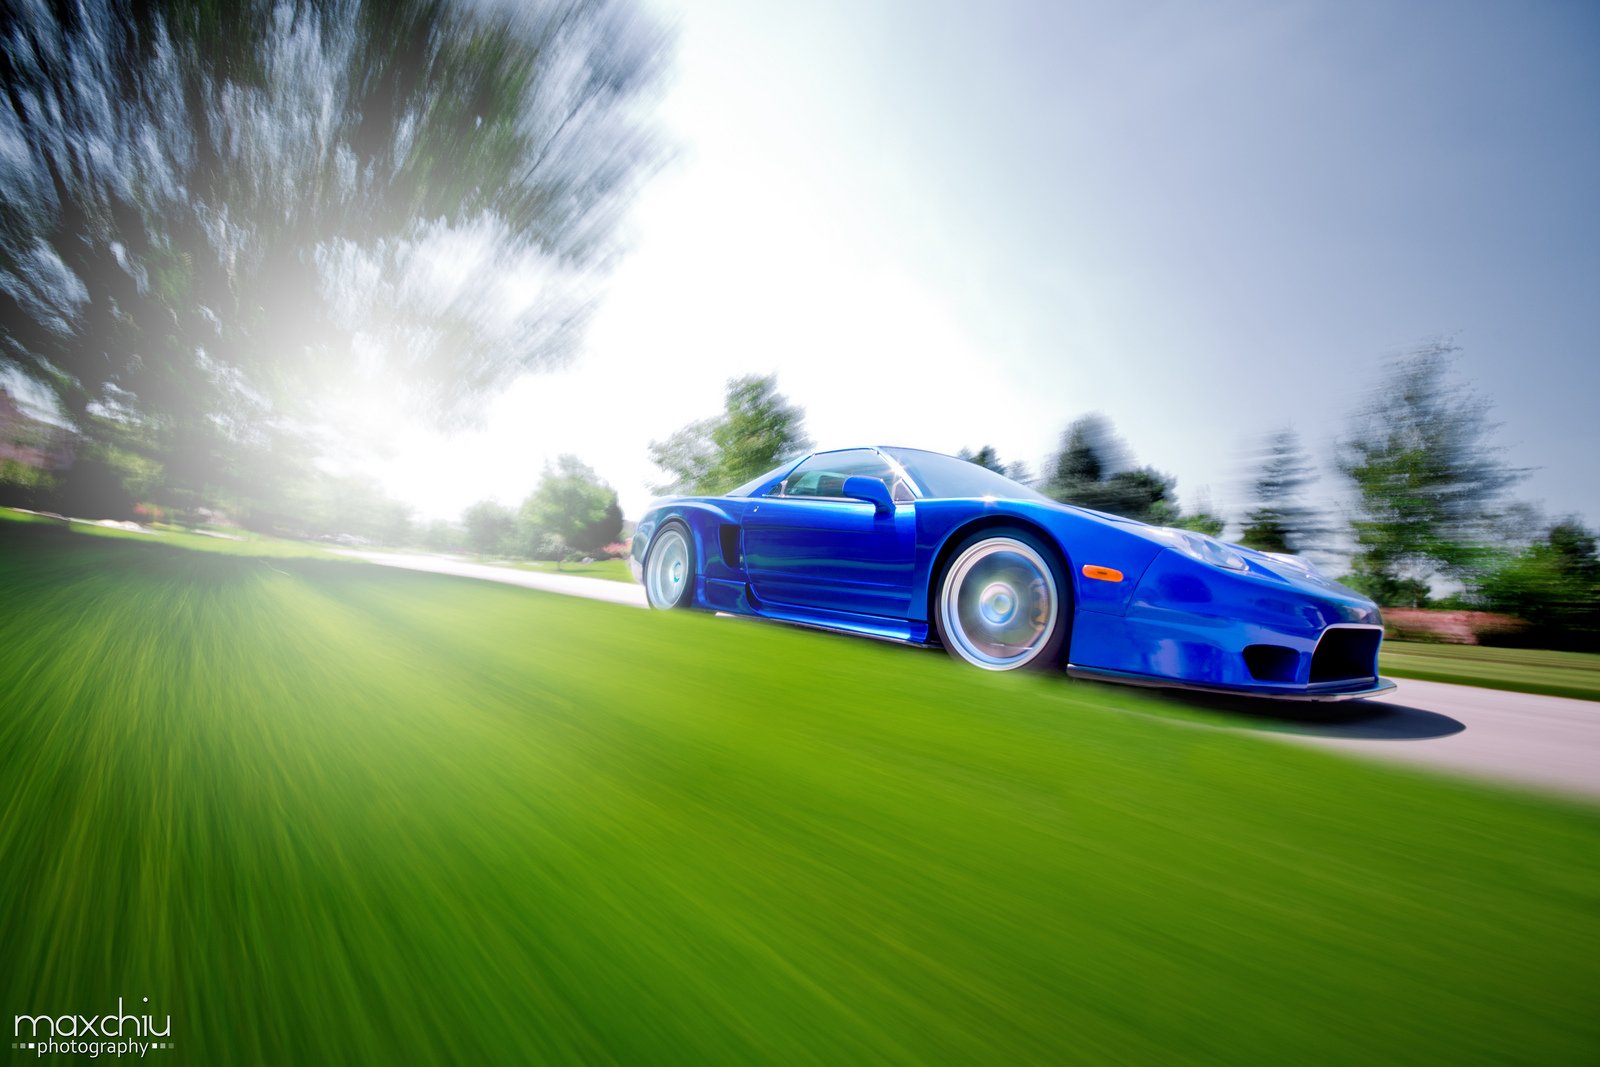 acura, Nsx, Cars, Coupe, 1991, 2005 Wallpaper